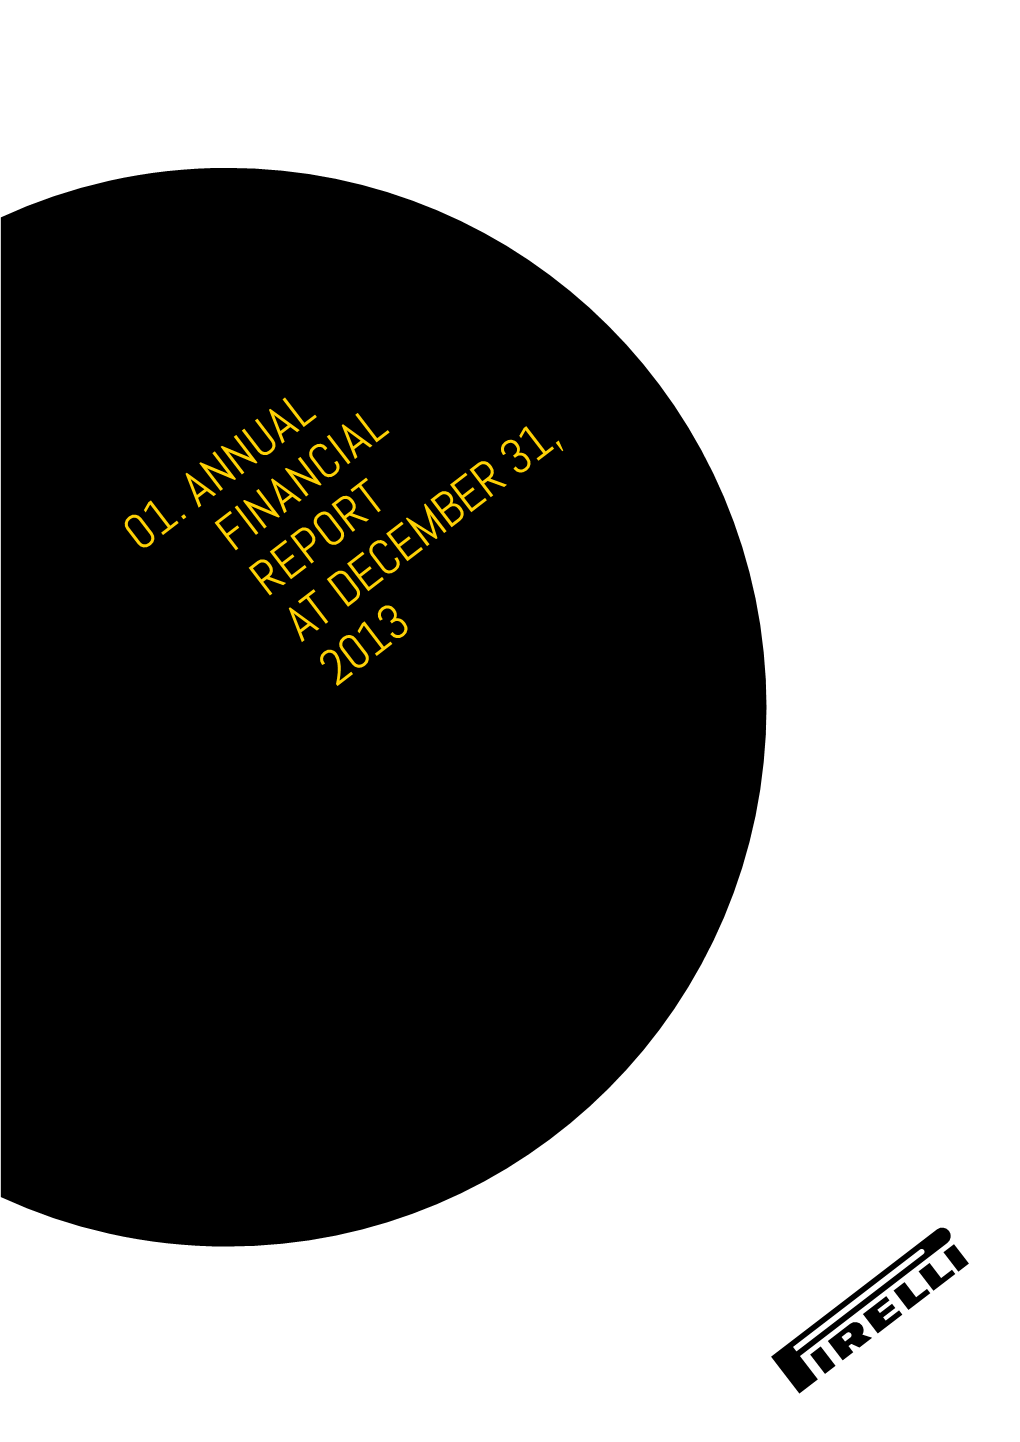 01. Annual Financial Report at December 31, 2013